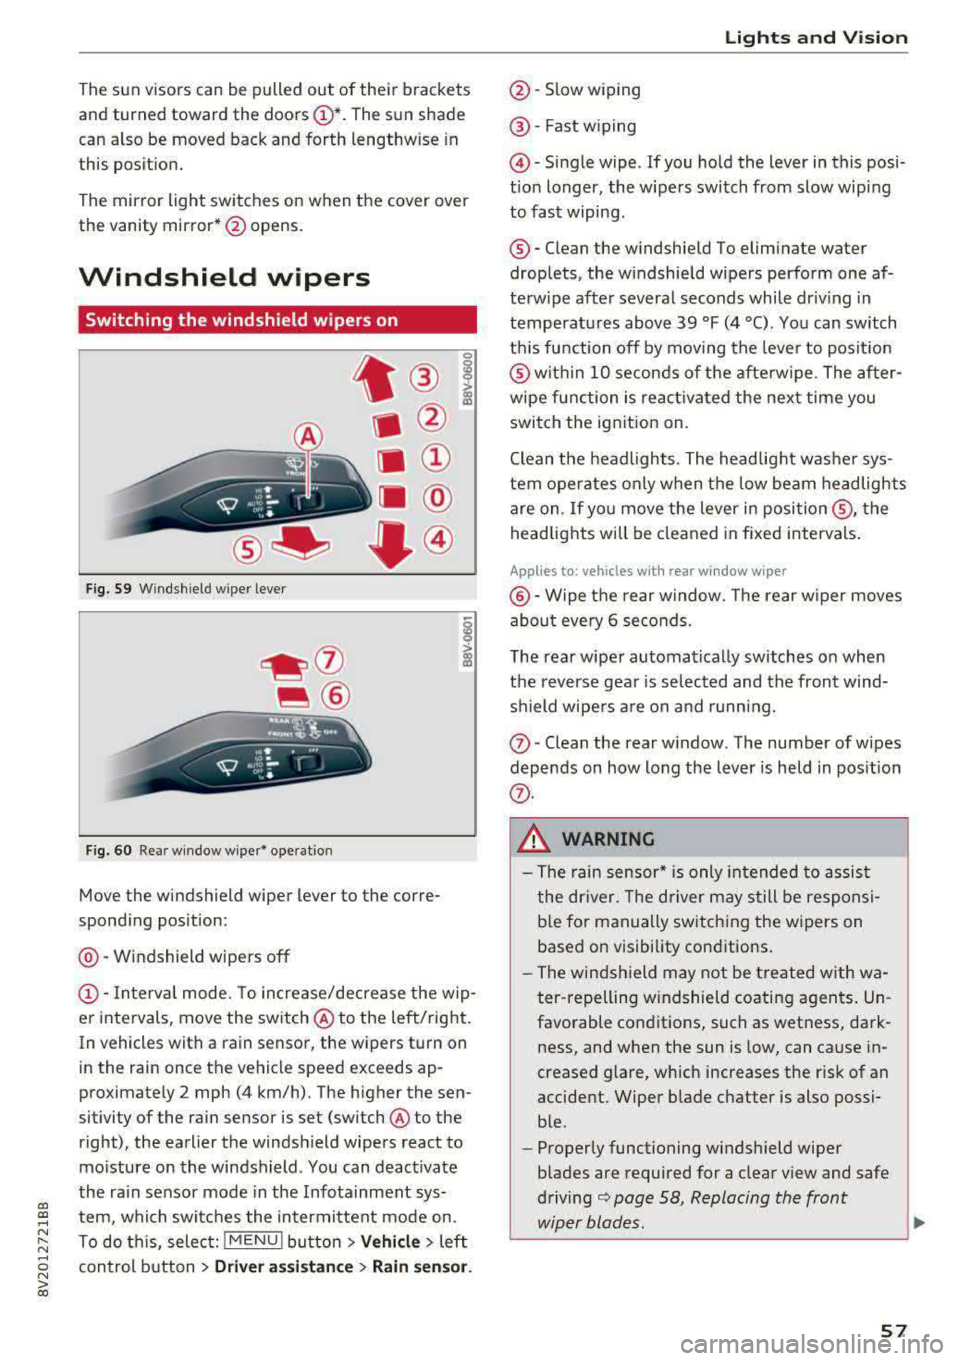 AUDI S3 SEDAN 2017  Owners Manual a,  a, ..... N 
" N ..... 0 N > 00 
The  sun  visors  can  be  pulled  out  of  their  brackets  
and  turned  toward  the  doors 
(D *. The  sun  shade 
can  also  be  moved  back  and  forth  length